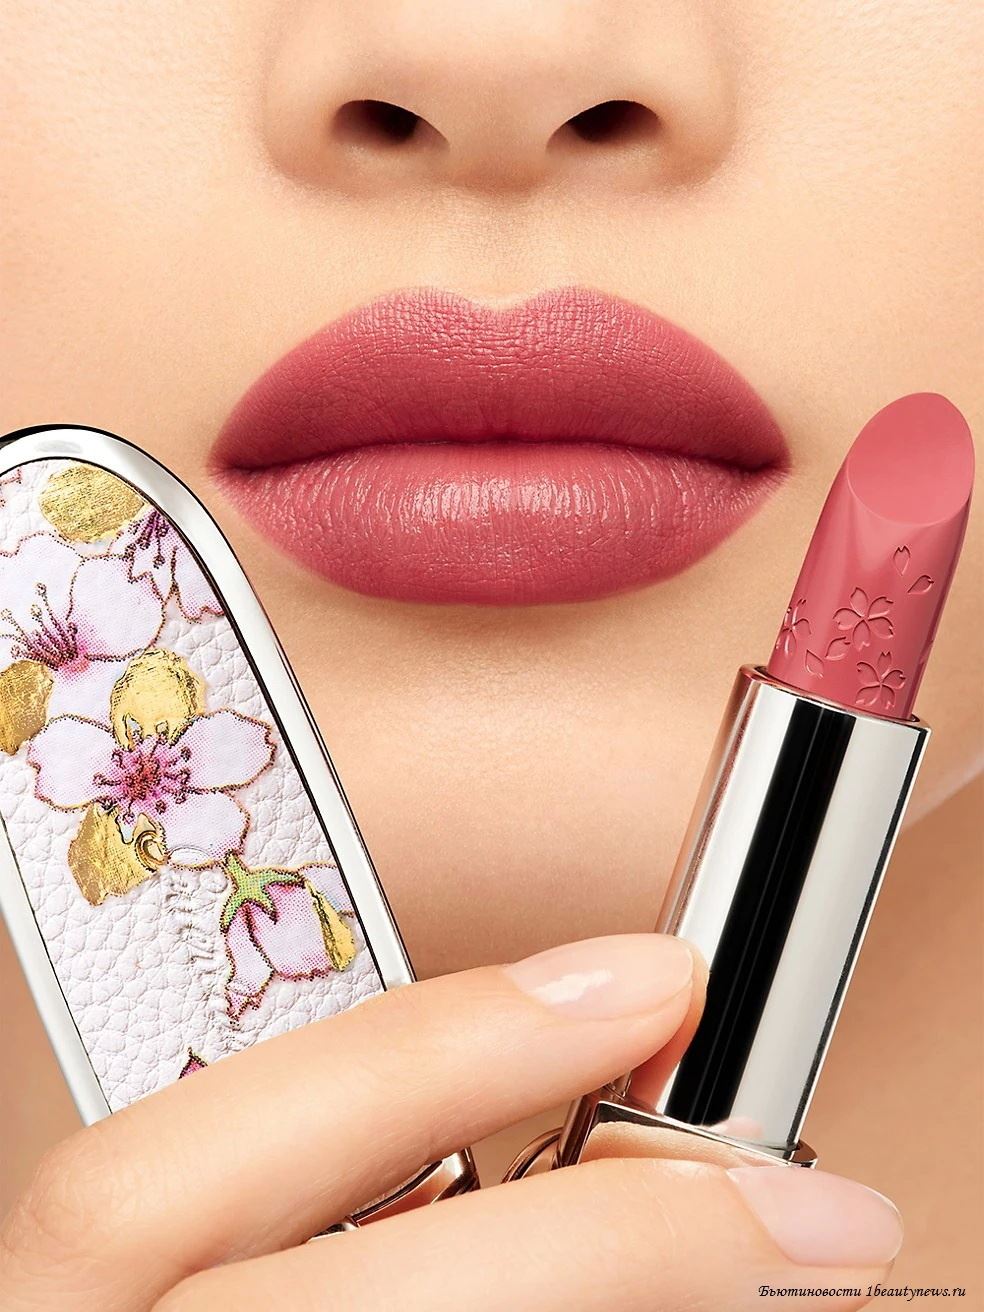 Guerlain Rouge G Cherry Blossom Lipstick Spring 2023 - Swatches